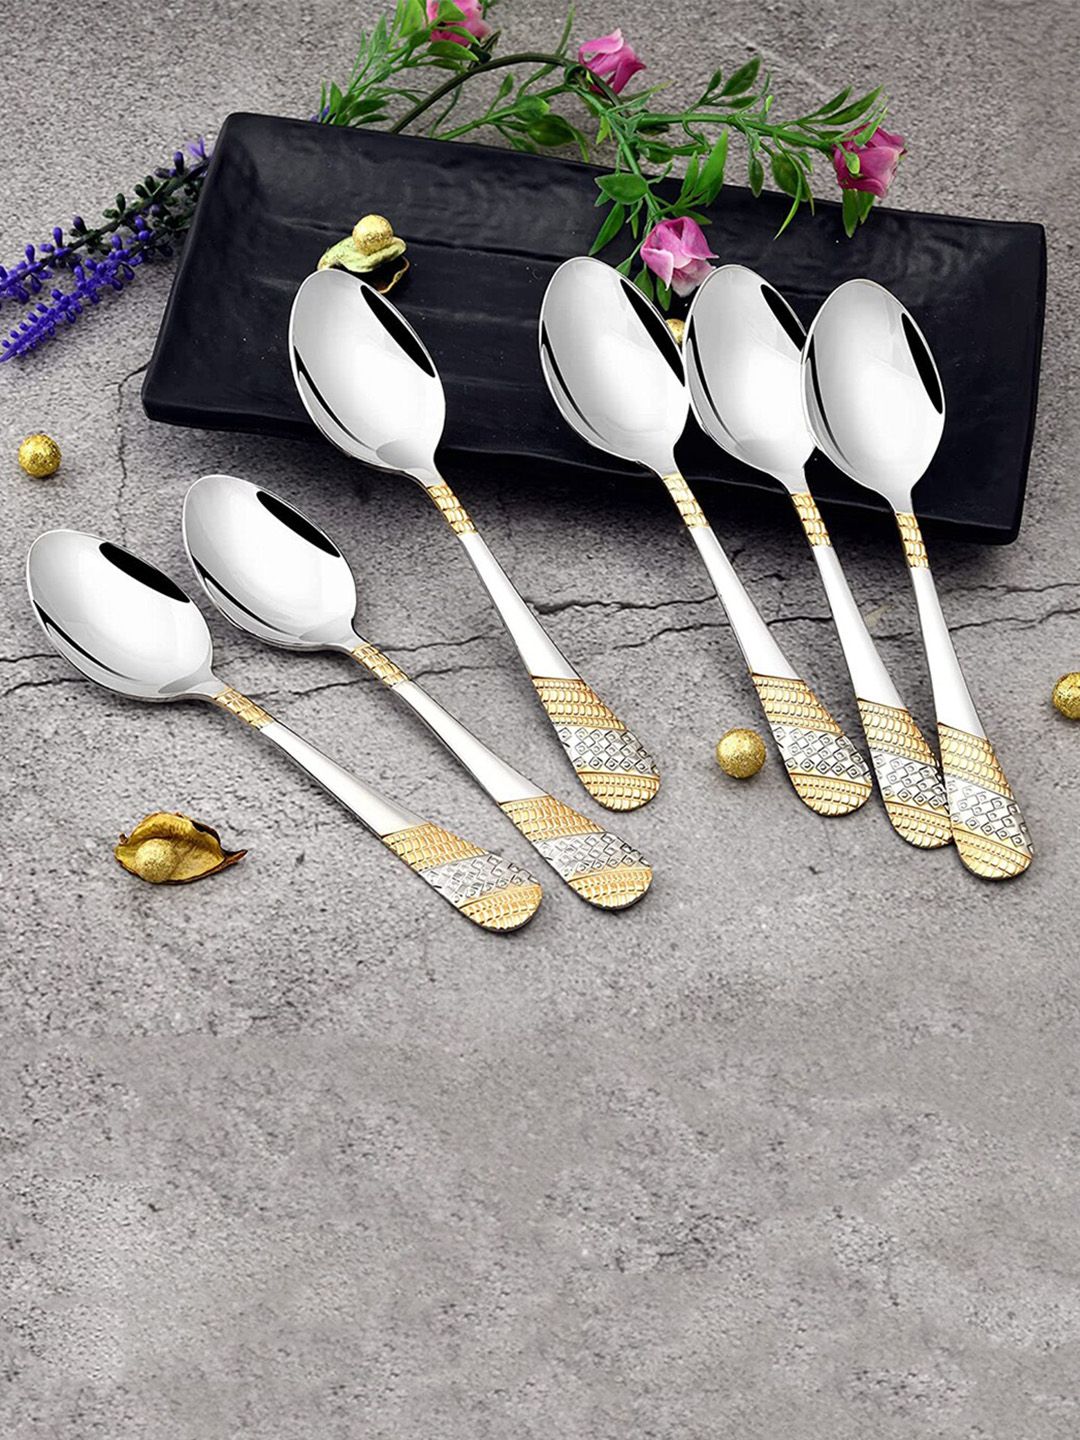 FNS Silver Set Of 6 Stainless Steel Tea Spoons Price in India